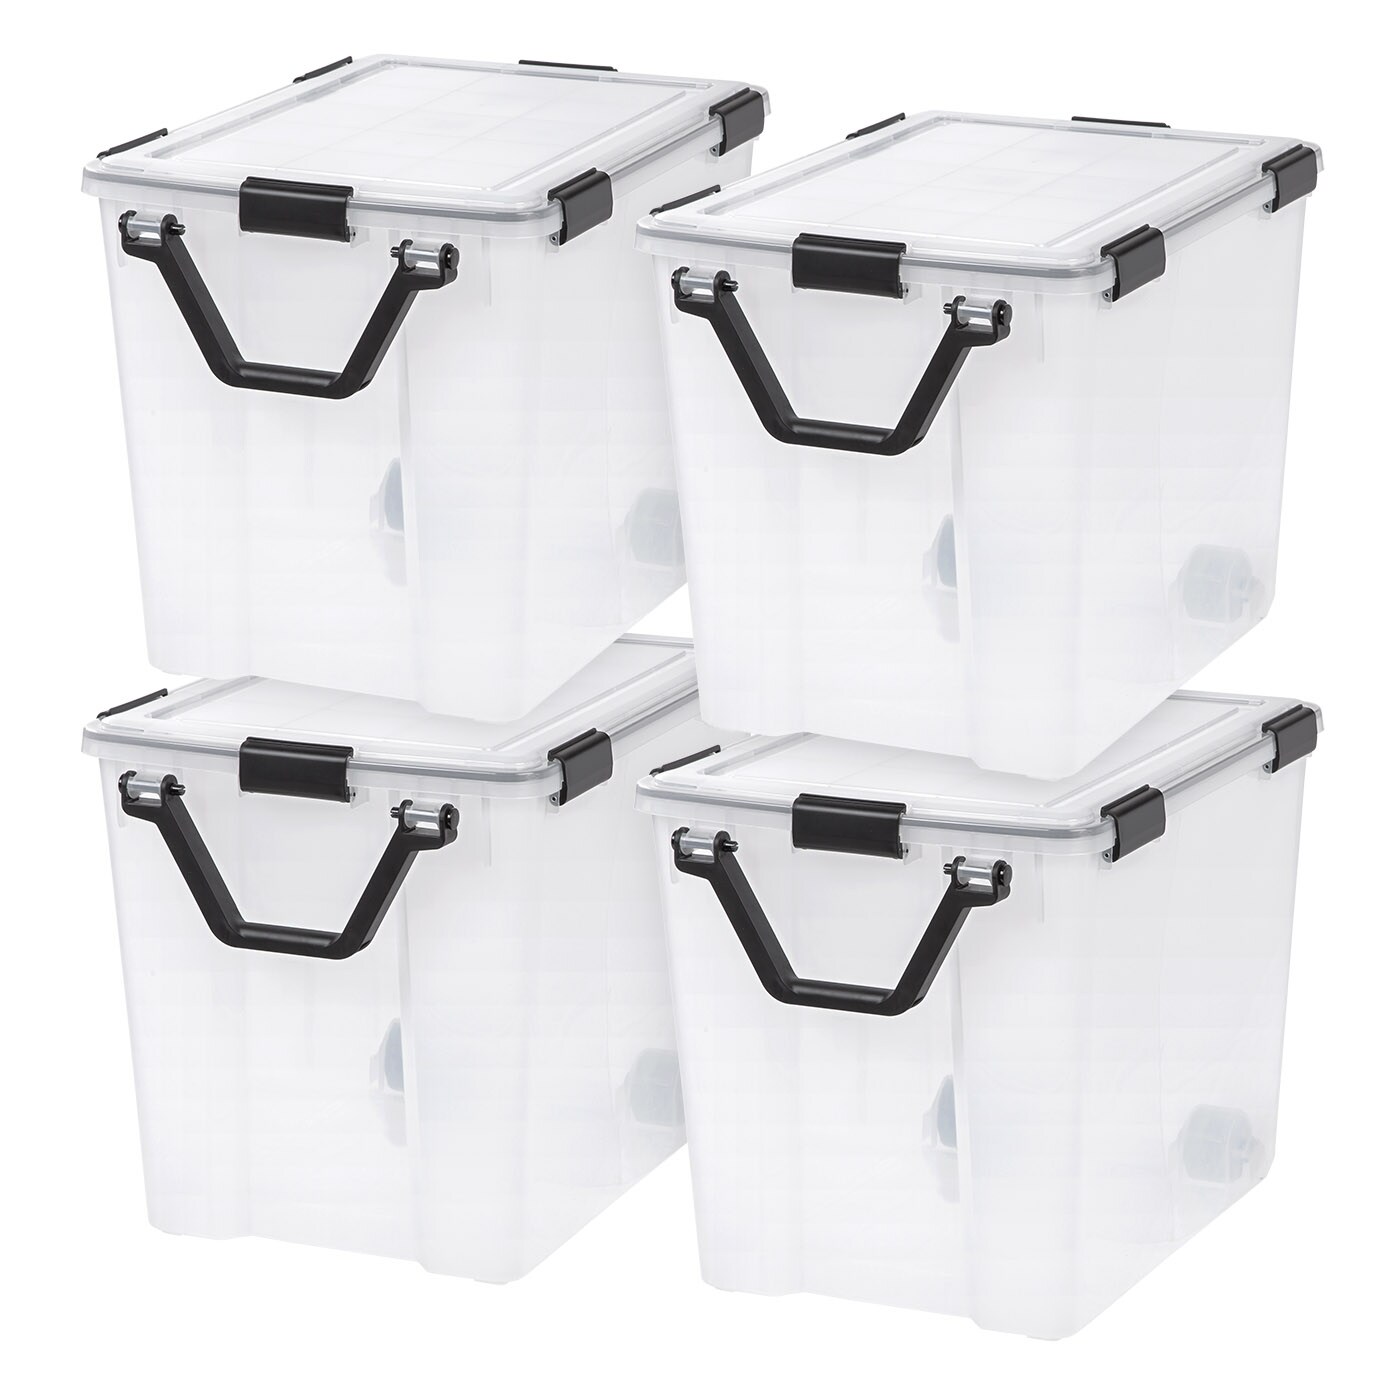 IRIS USA 4 Pack 106qt WEATHERPRO Wheeled Plastic Storage Bin with Seal Latching Lid and 6 Buckles, Pull Handle